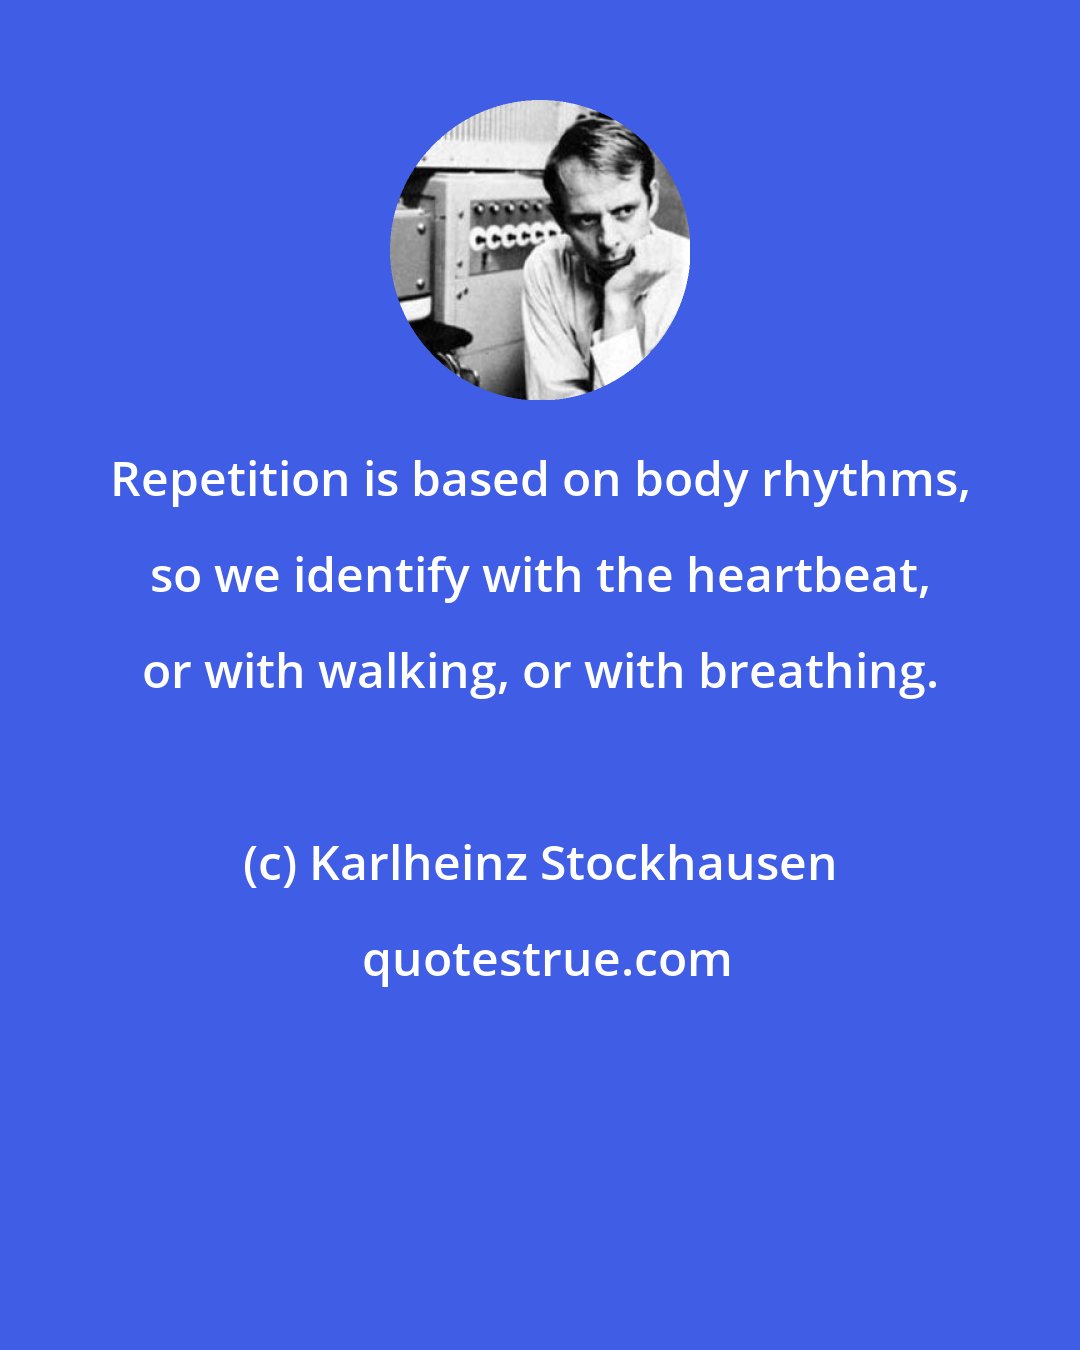 Karlheinz Stockhausen: Repetition is based on body rhythms, so we identify with the heartbeat, or with walking, or with breathing.